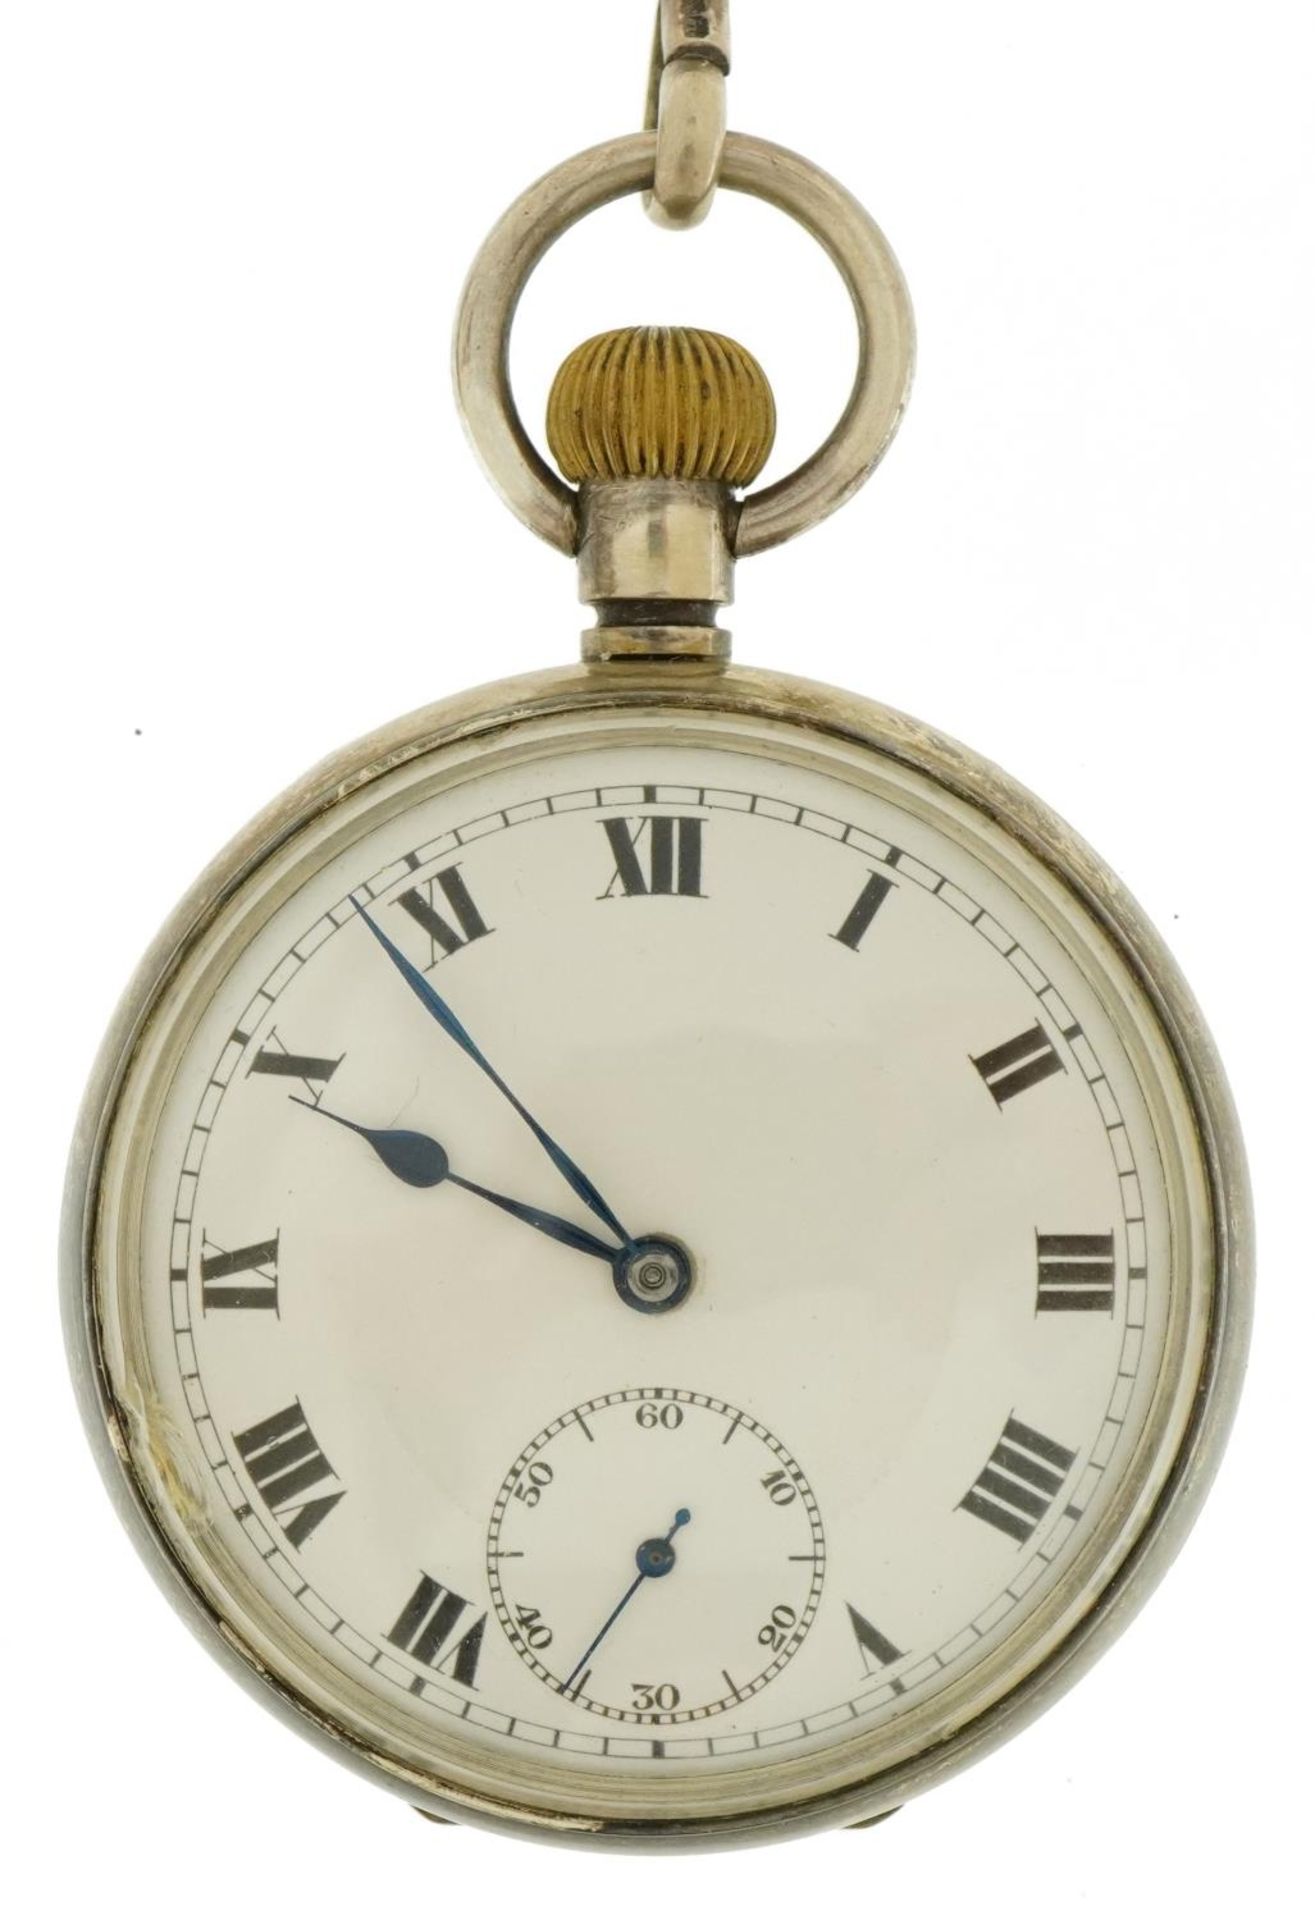 Gentlemen's silver open face pocket watch with enamelled dial on a graduated silver watch chain with